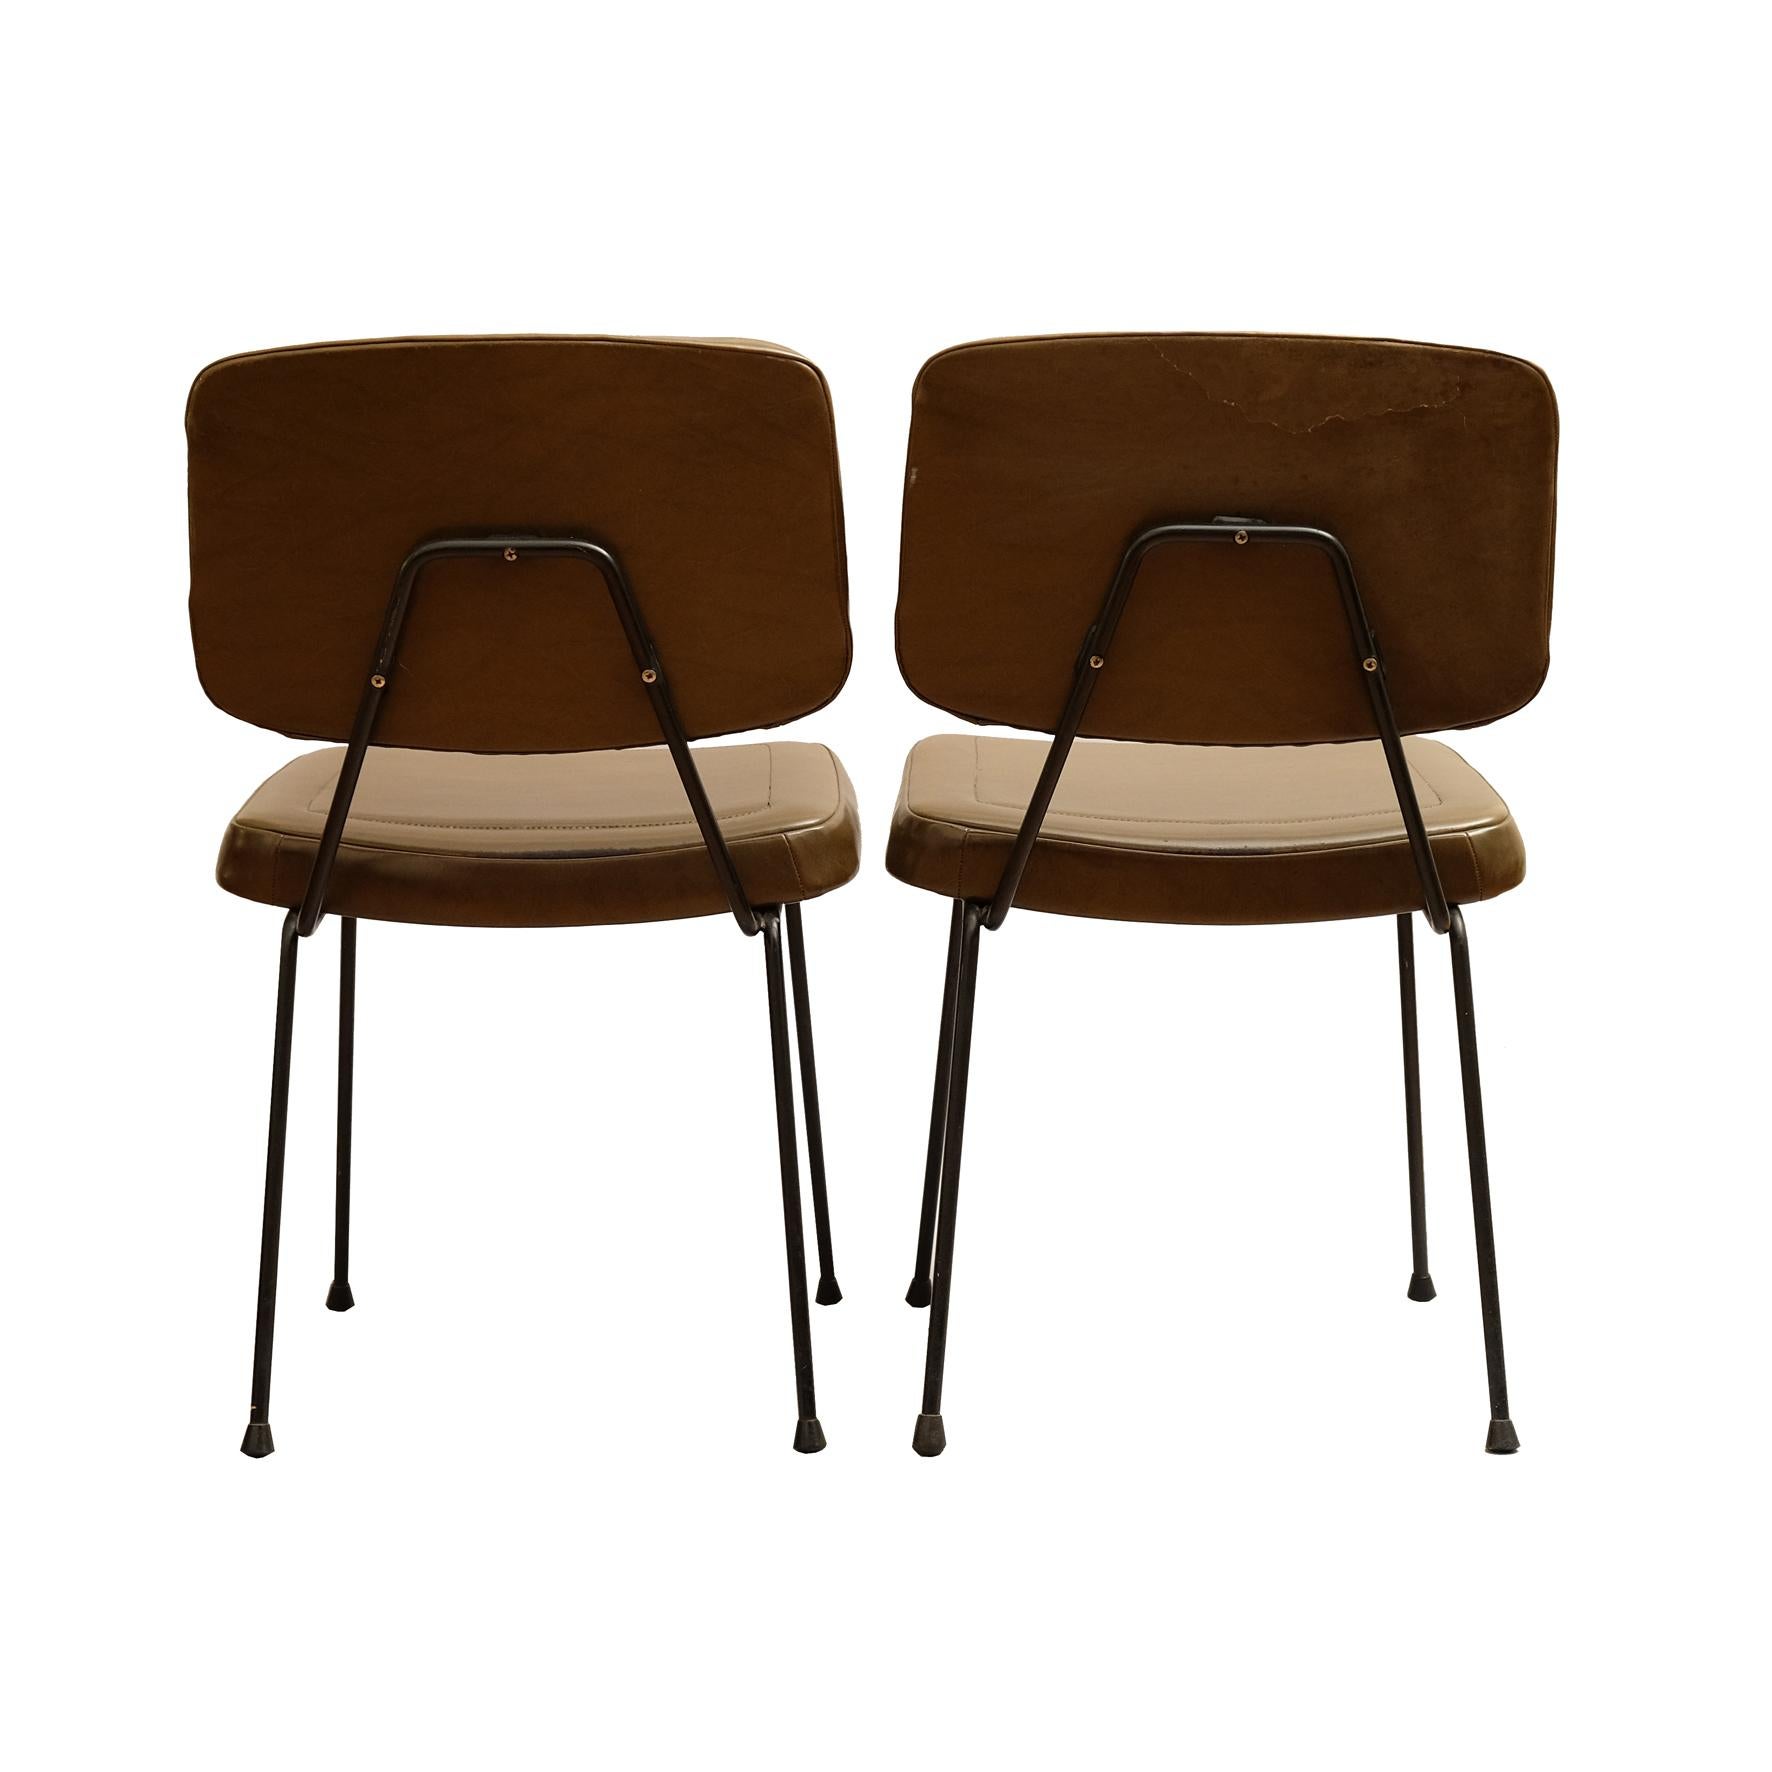 French Pierre Paulin, a Pair of Chairs, Model CM 196, Thonet, 1960s